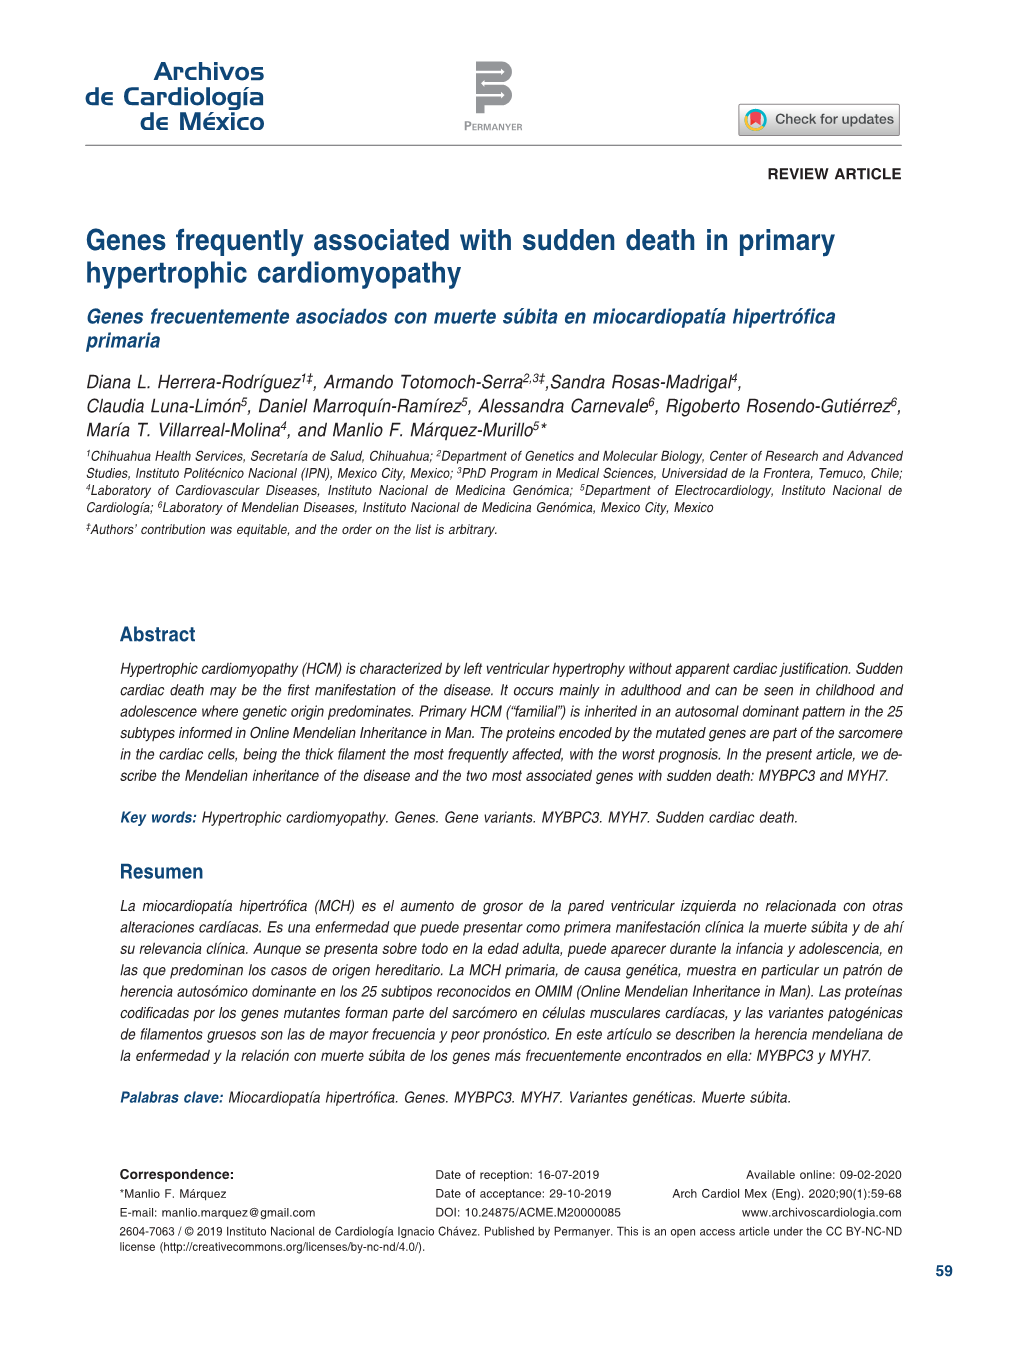 Genes Frequently Associated with Sudden Death in Primary